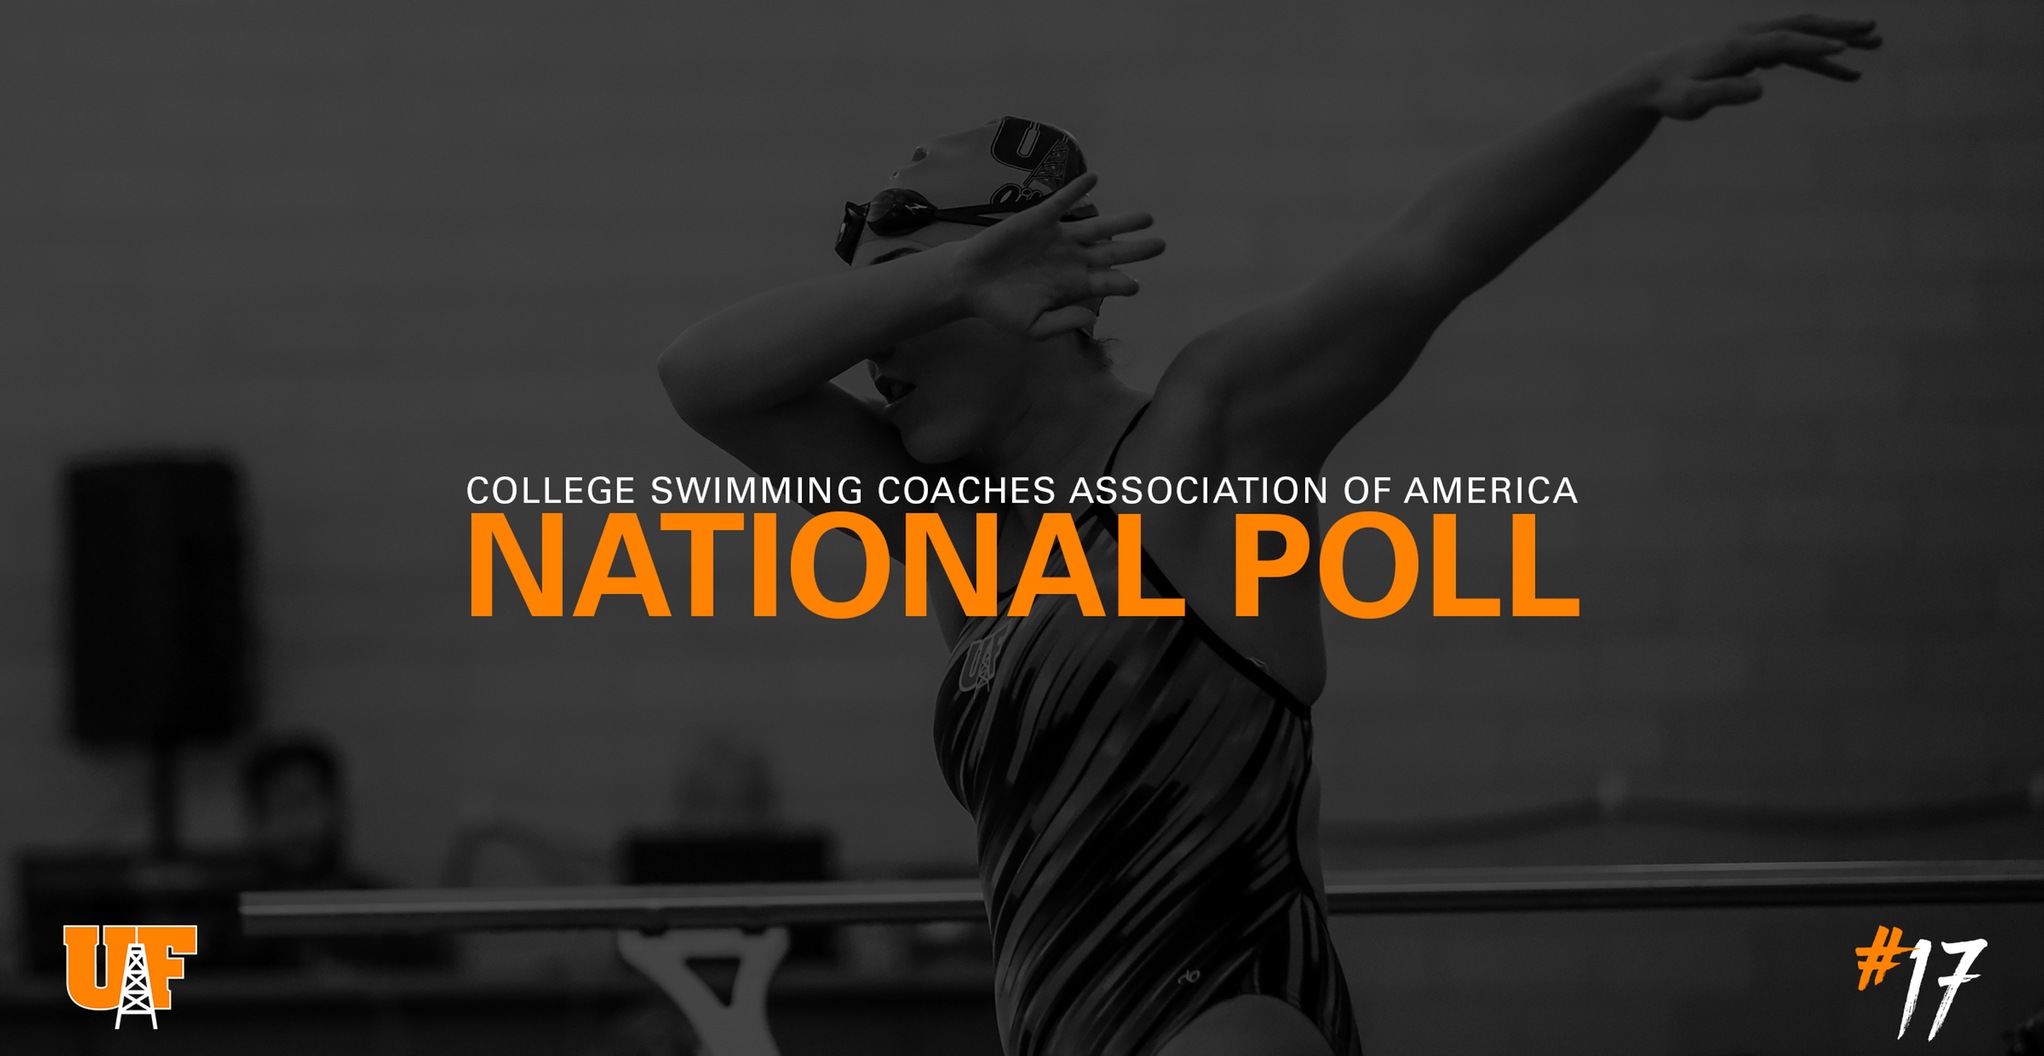 Women's Swimming & Diving Up to 17th in Poll